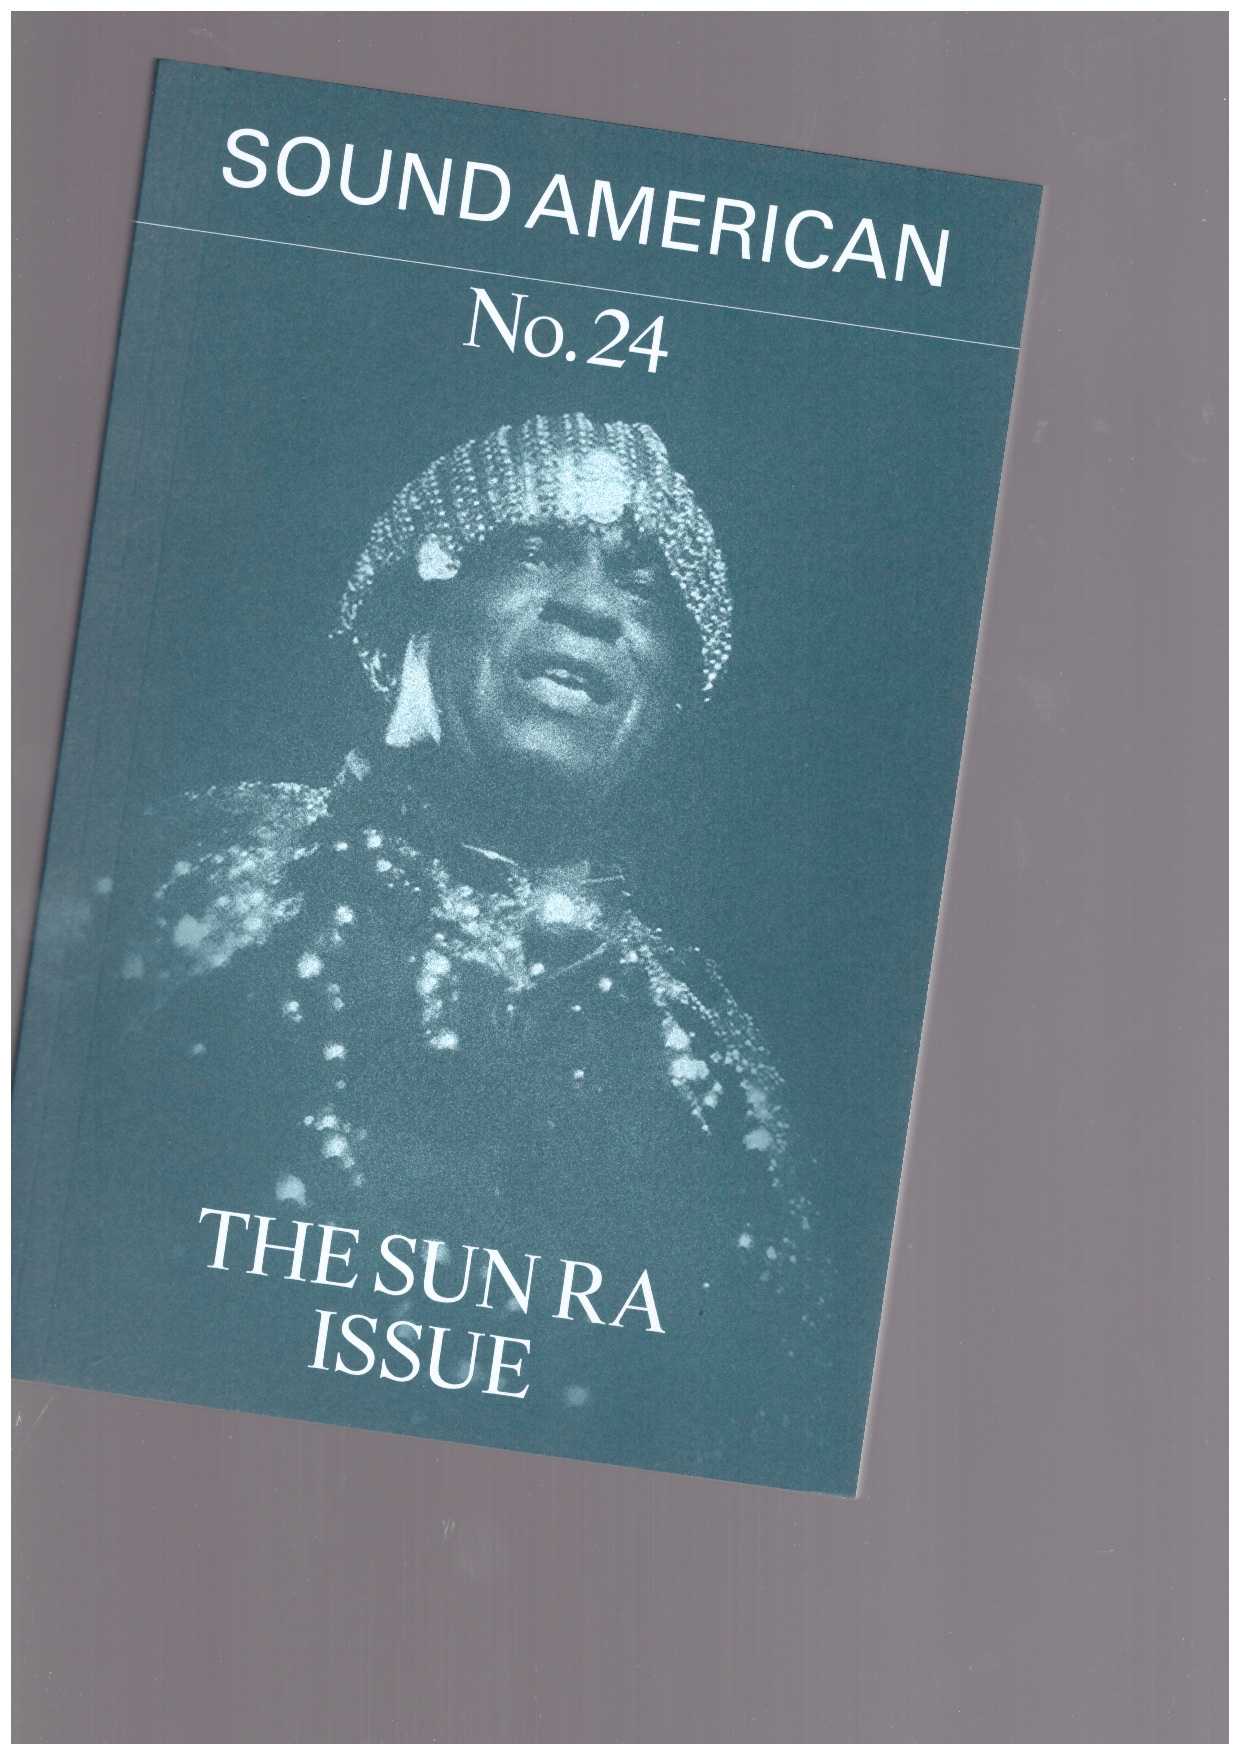 WOOLEY, Nate (ed.) - Sound American #24: The Sun Ra issue